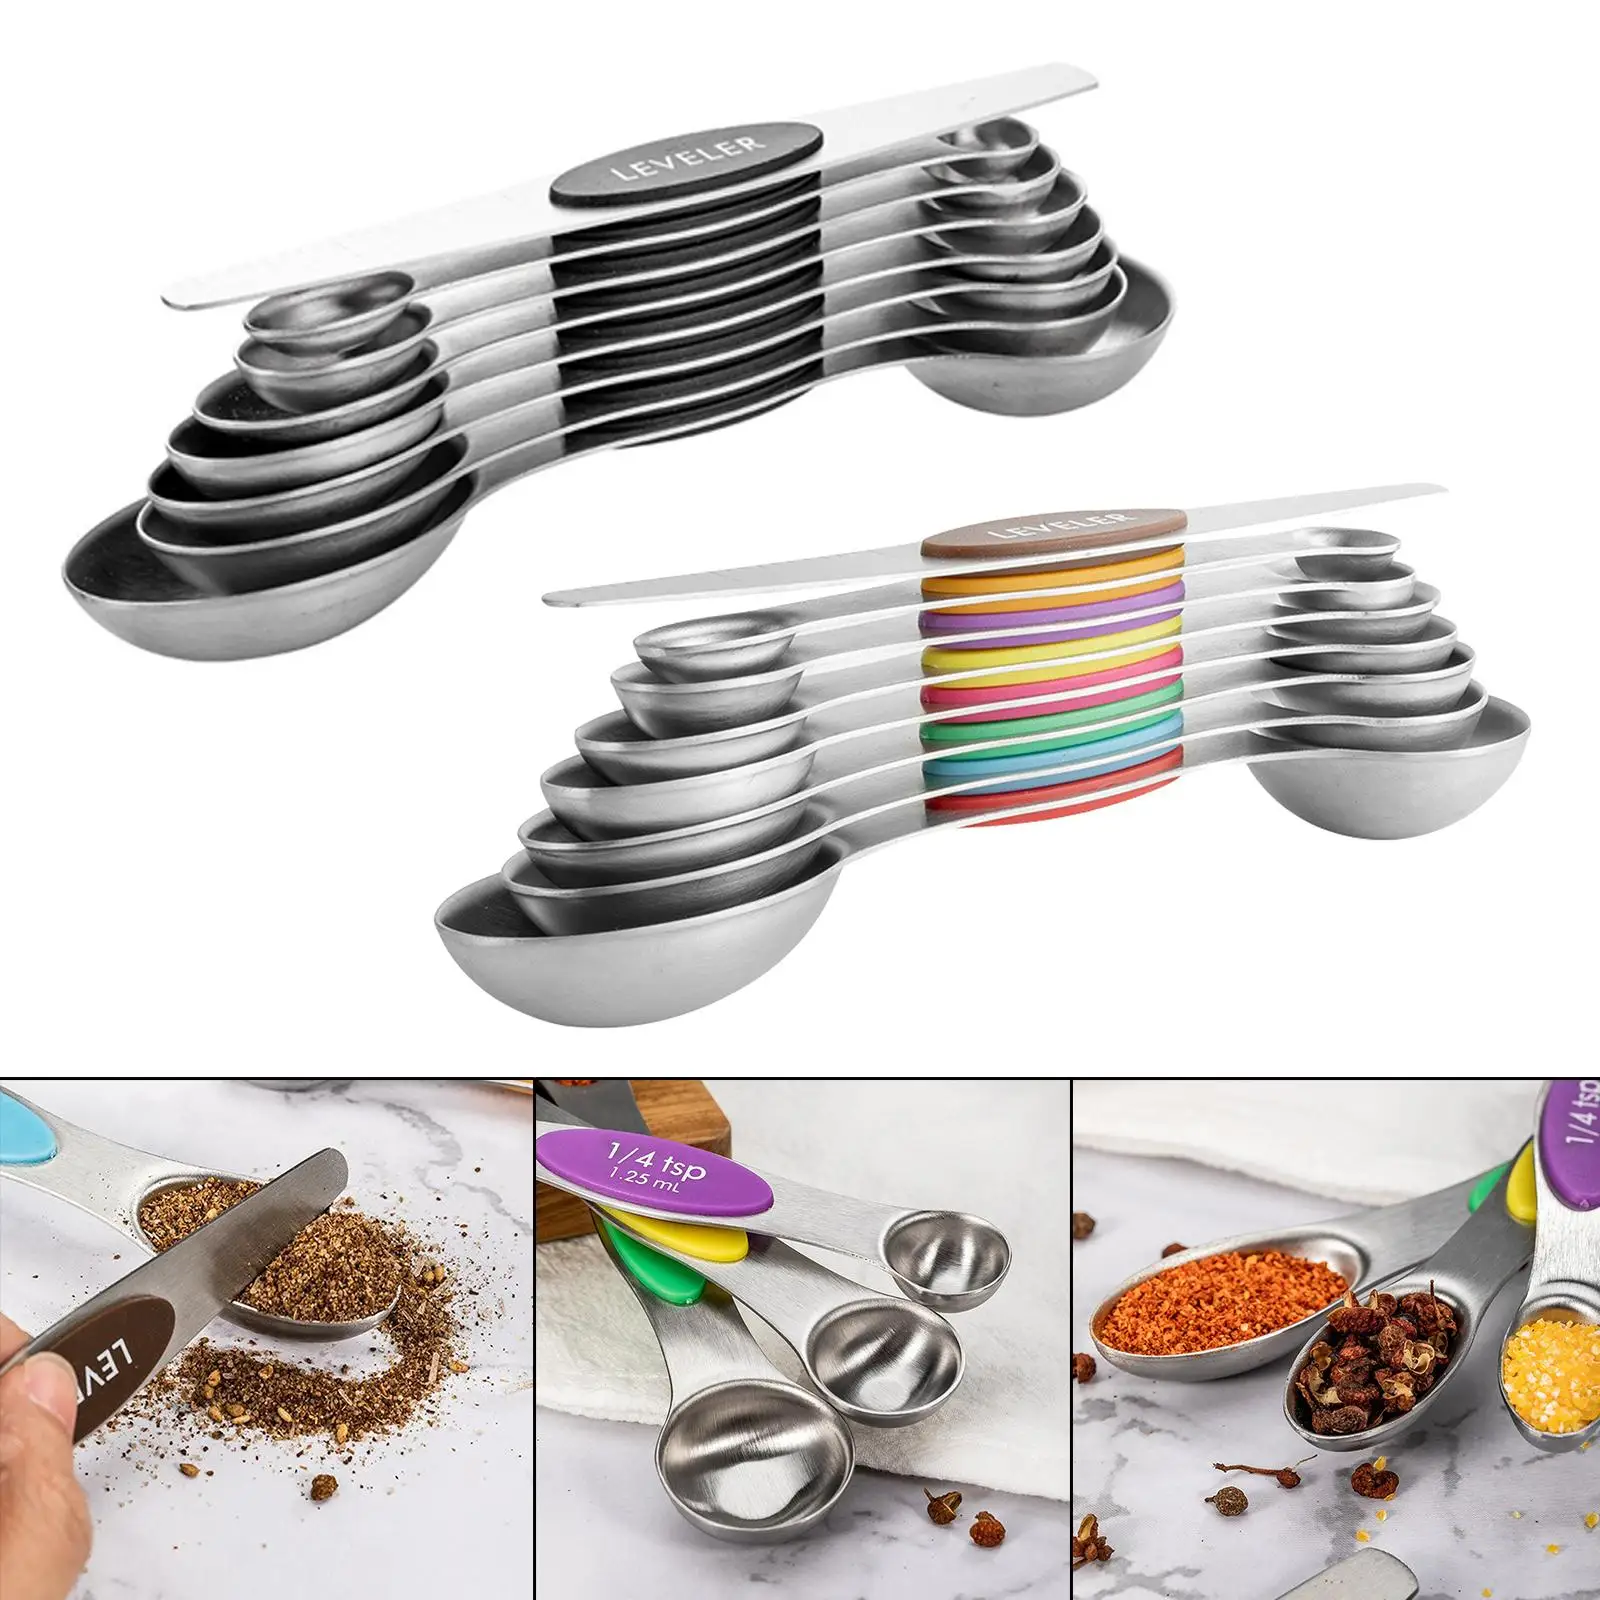 Stainless Steel Dual Sided Measuring Spoons Set of 8 , 1/8 Tsp, 1/4 Tsp, 1/2 Tsp, 3/4 Tsp, 1 Tsp, 1/2 Tbsp, 1 Tbsp Plus Leveler